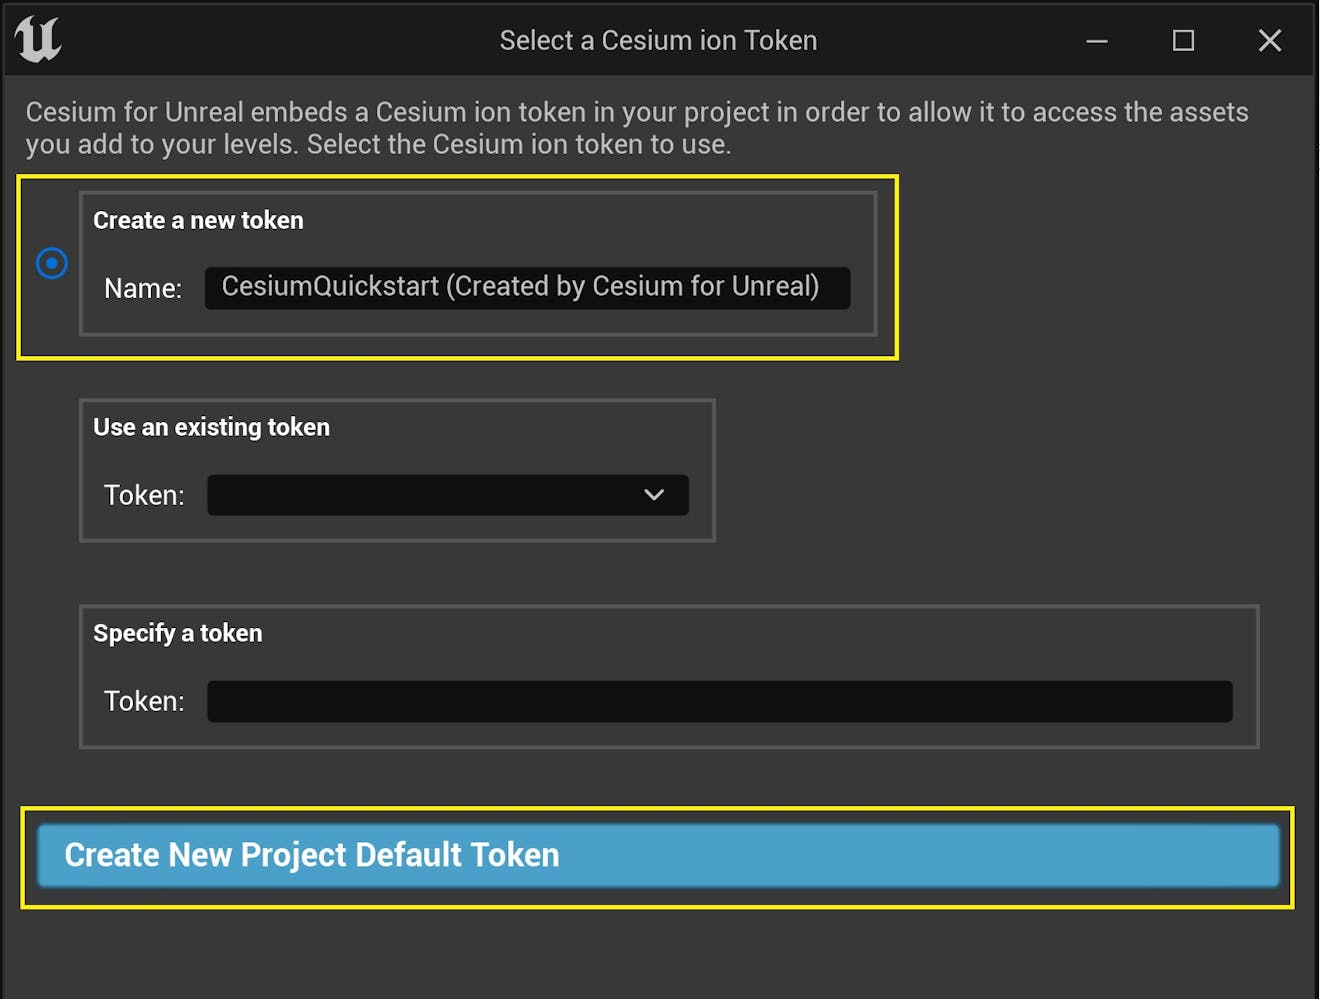 Cesium for Unreal tutorial: Photorealistic 3D Tiles. A new window will appear to configure the token. Select the Create a new token option, and rename the token if you wish. Then, press the Create New Project Default Token button.